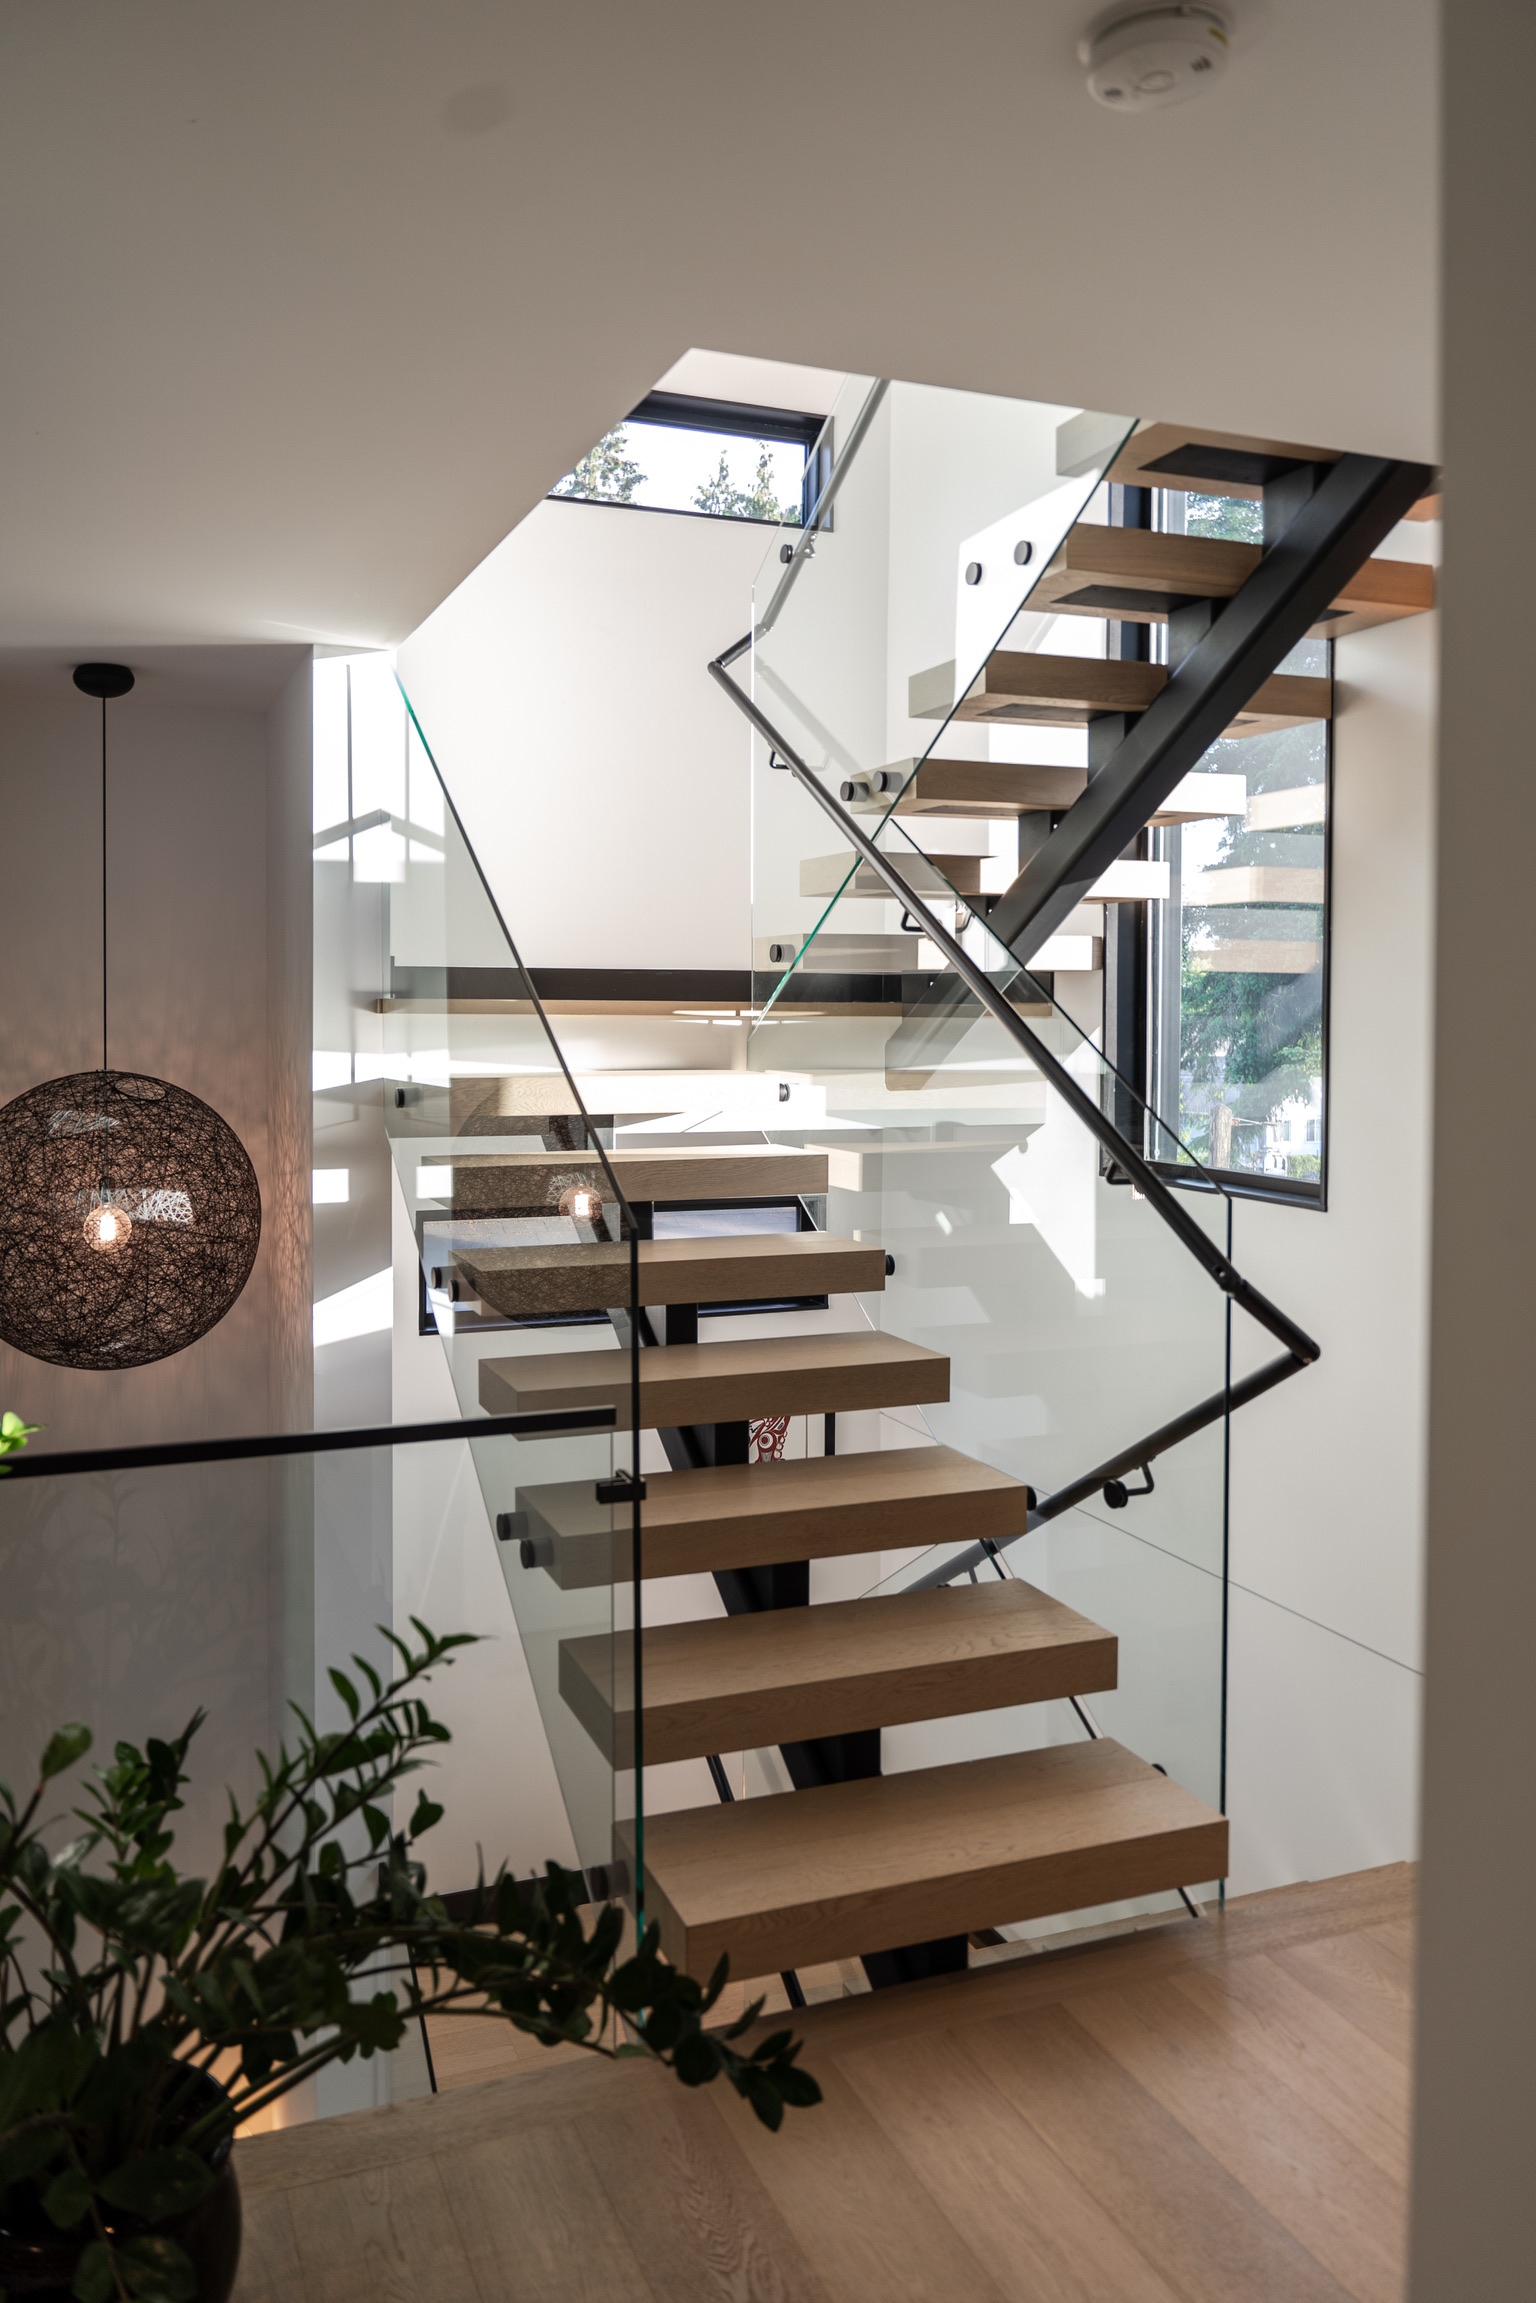 Airy wooden stairs with glass railing